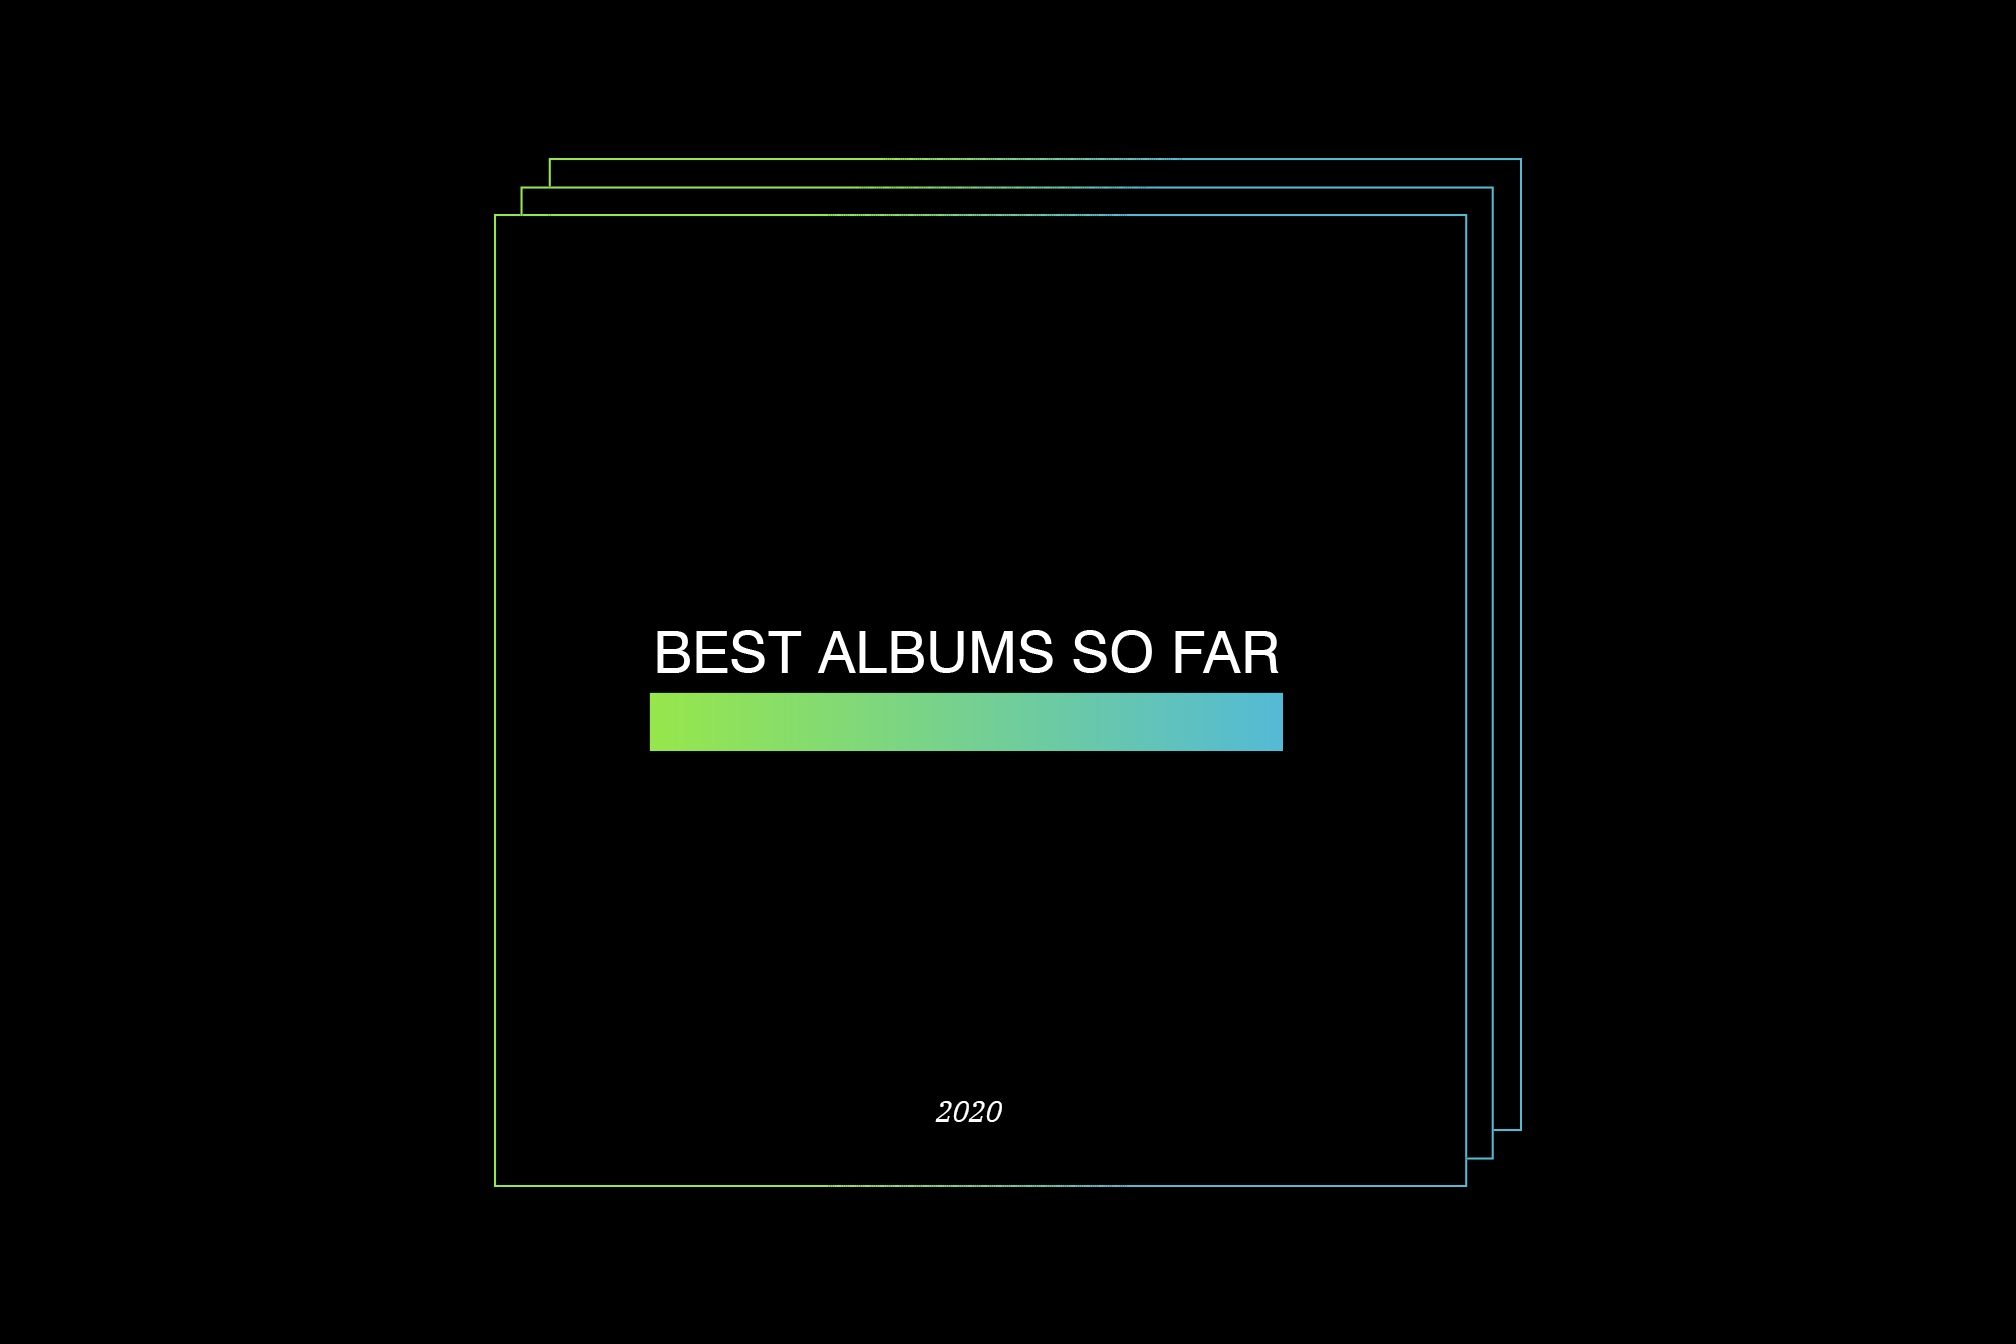 The best albums of 2020 so far